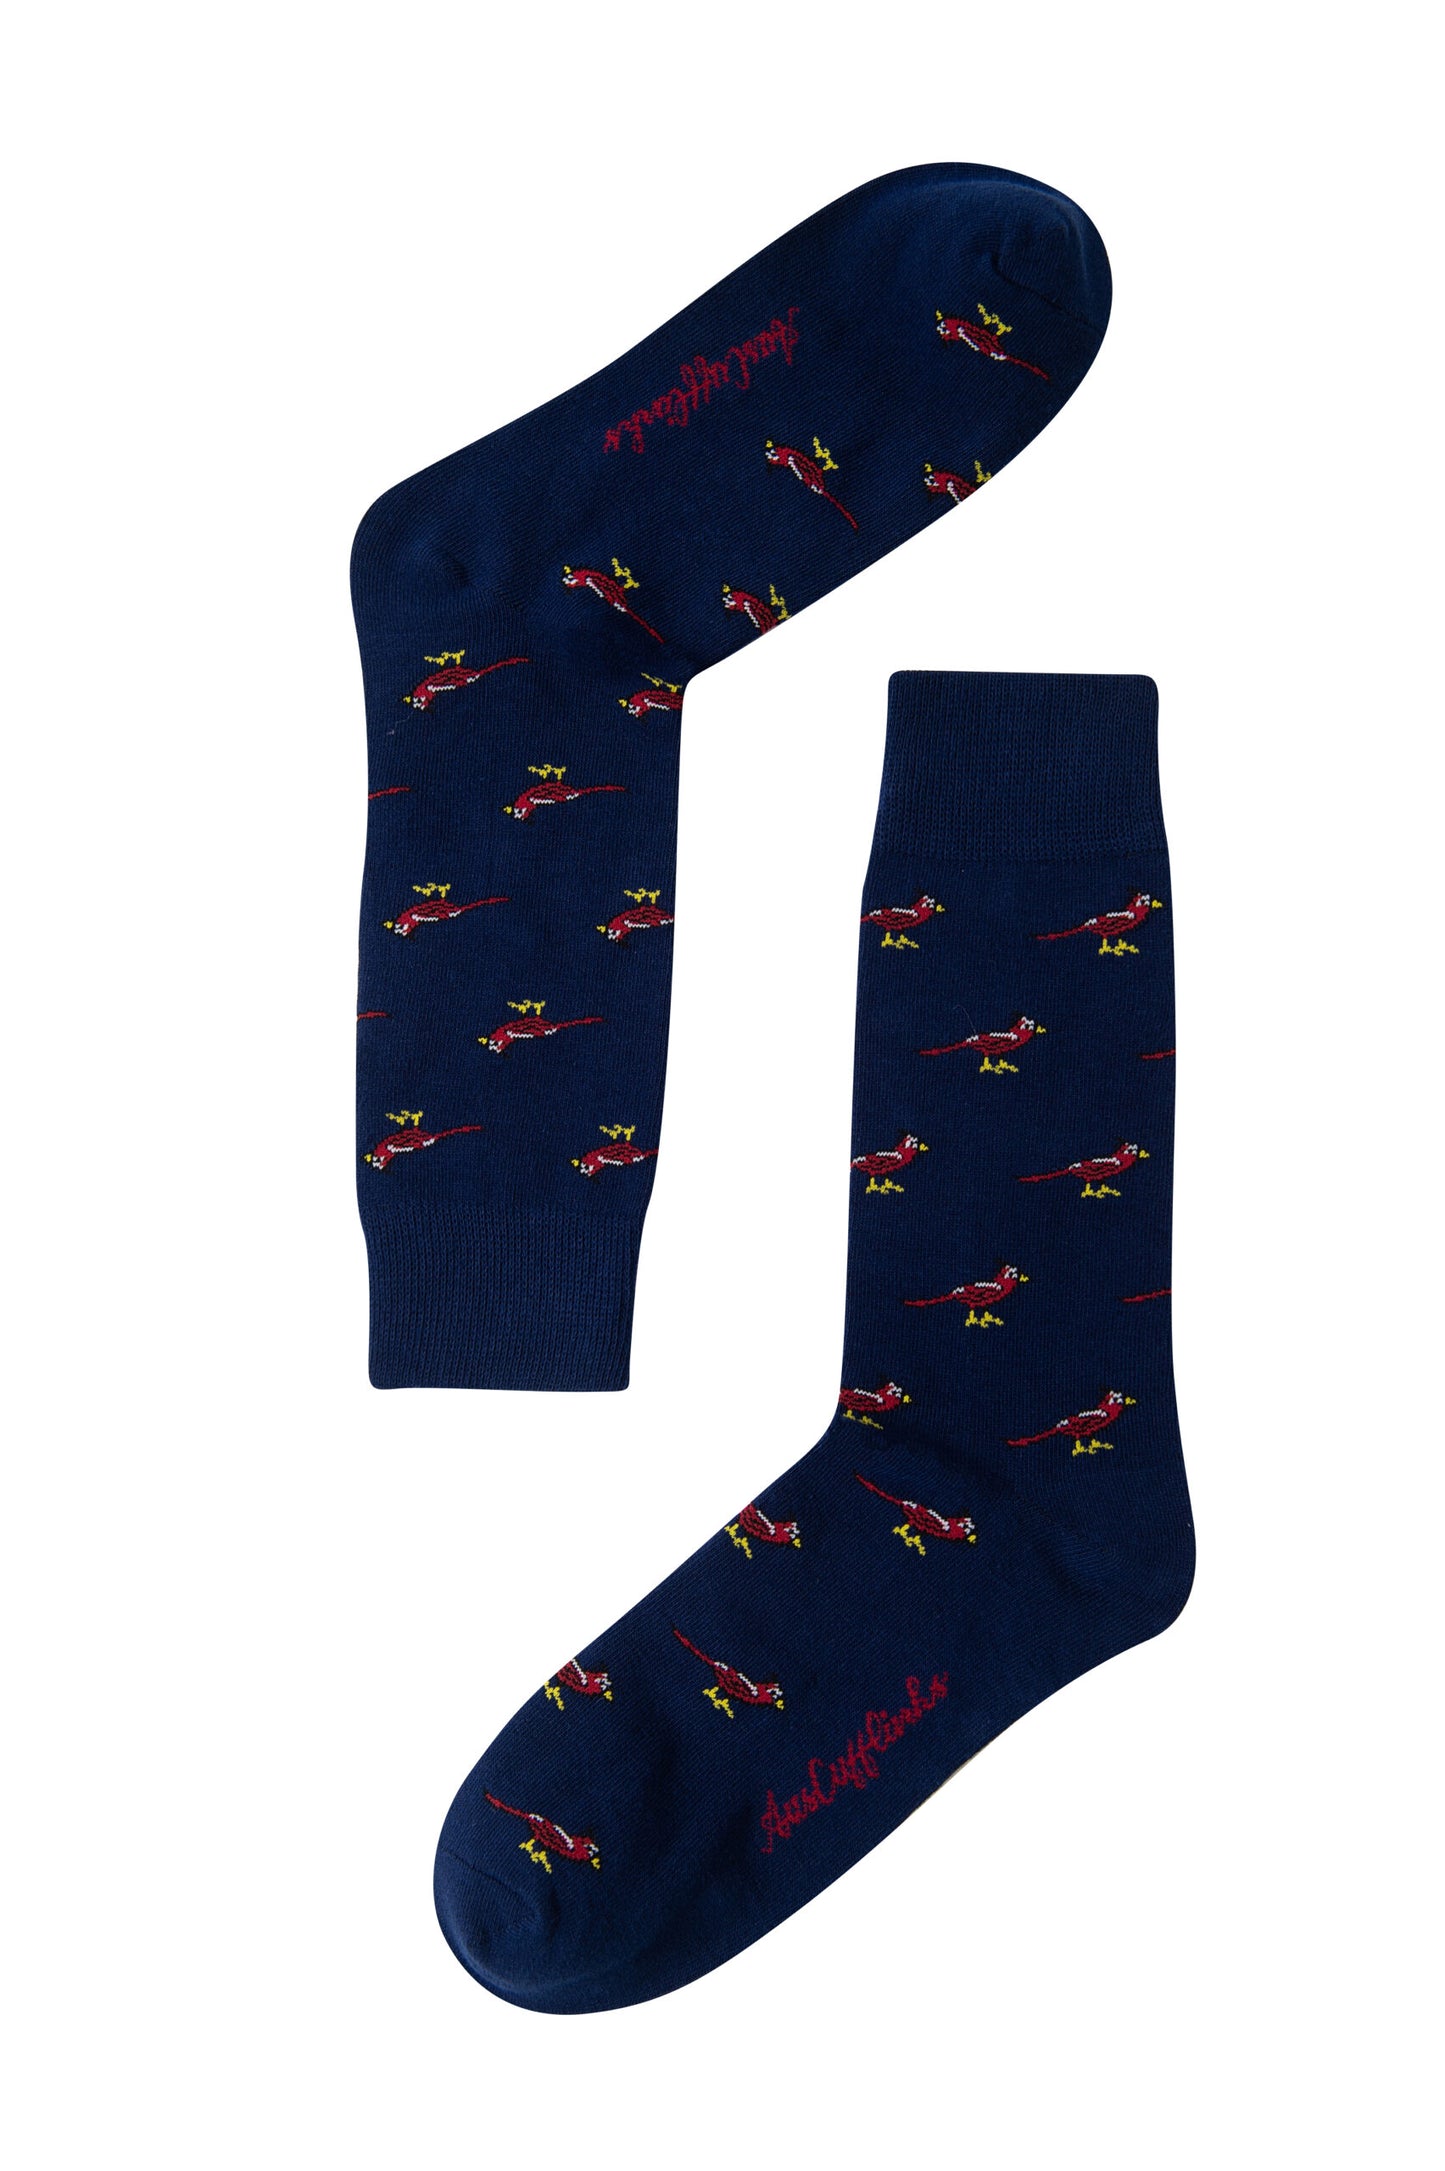 A pair of Cardinal Bird Socks with a red and blue design.